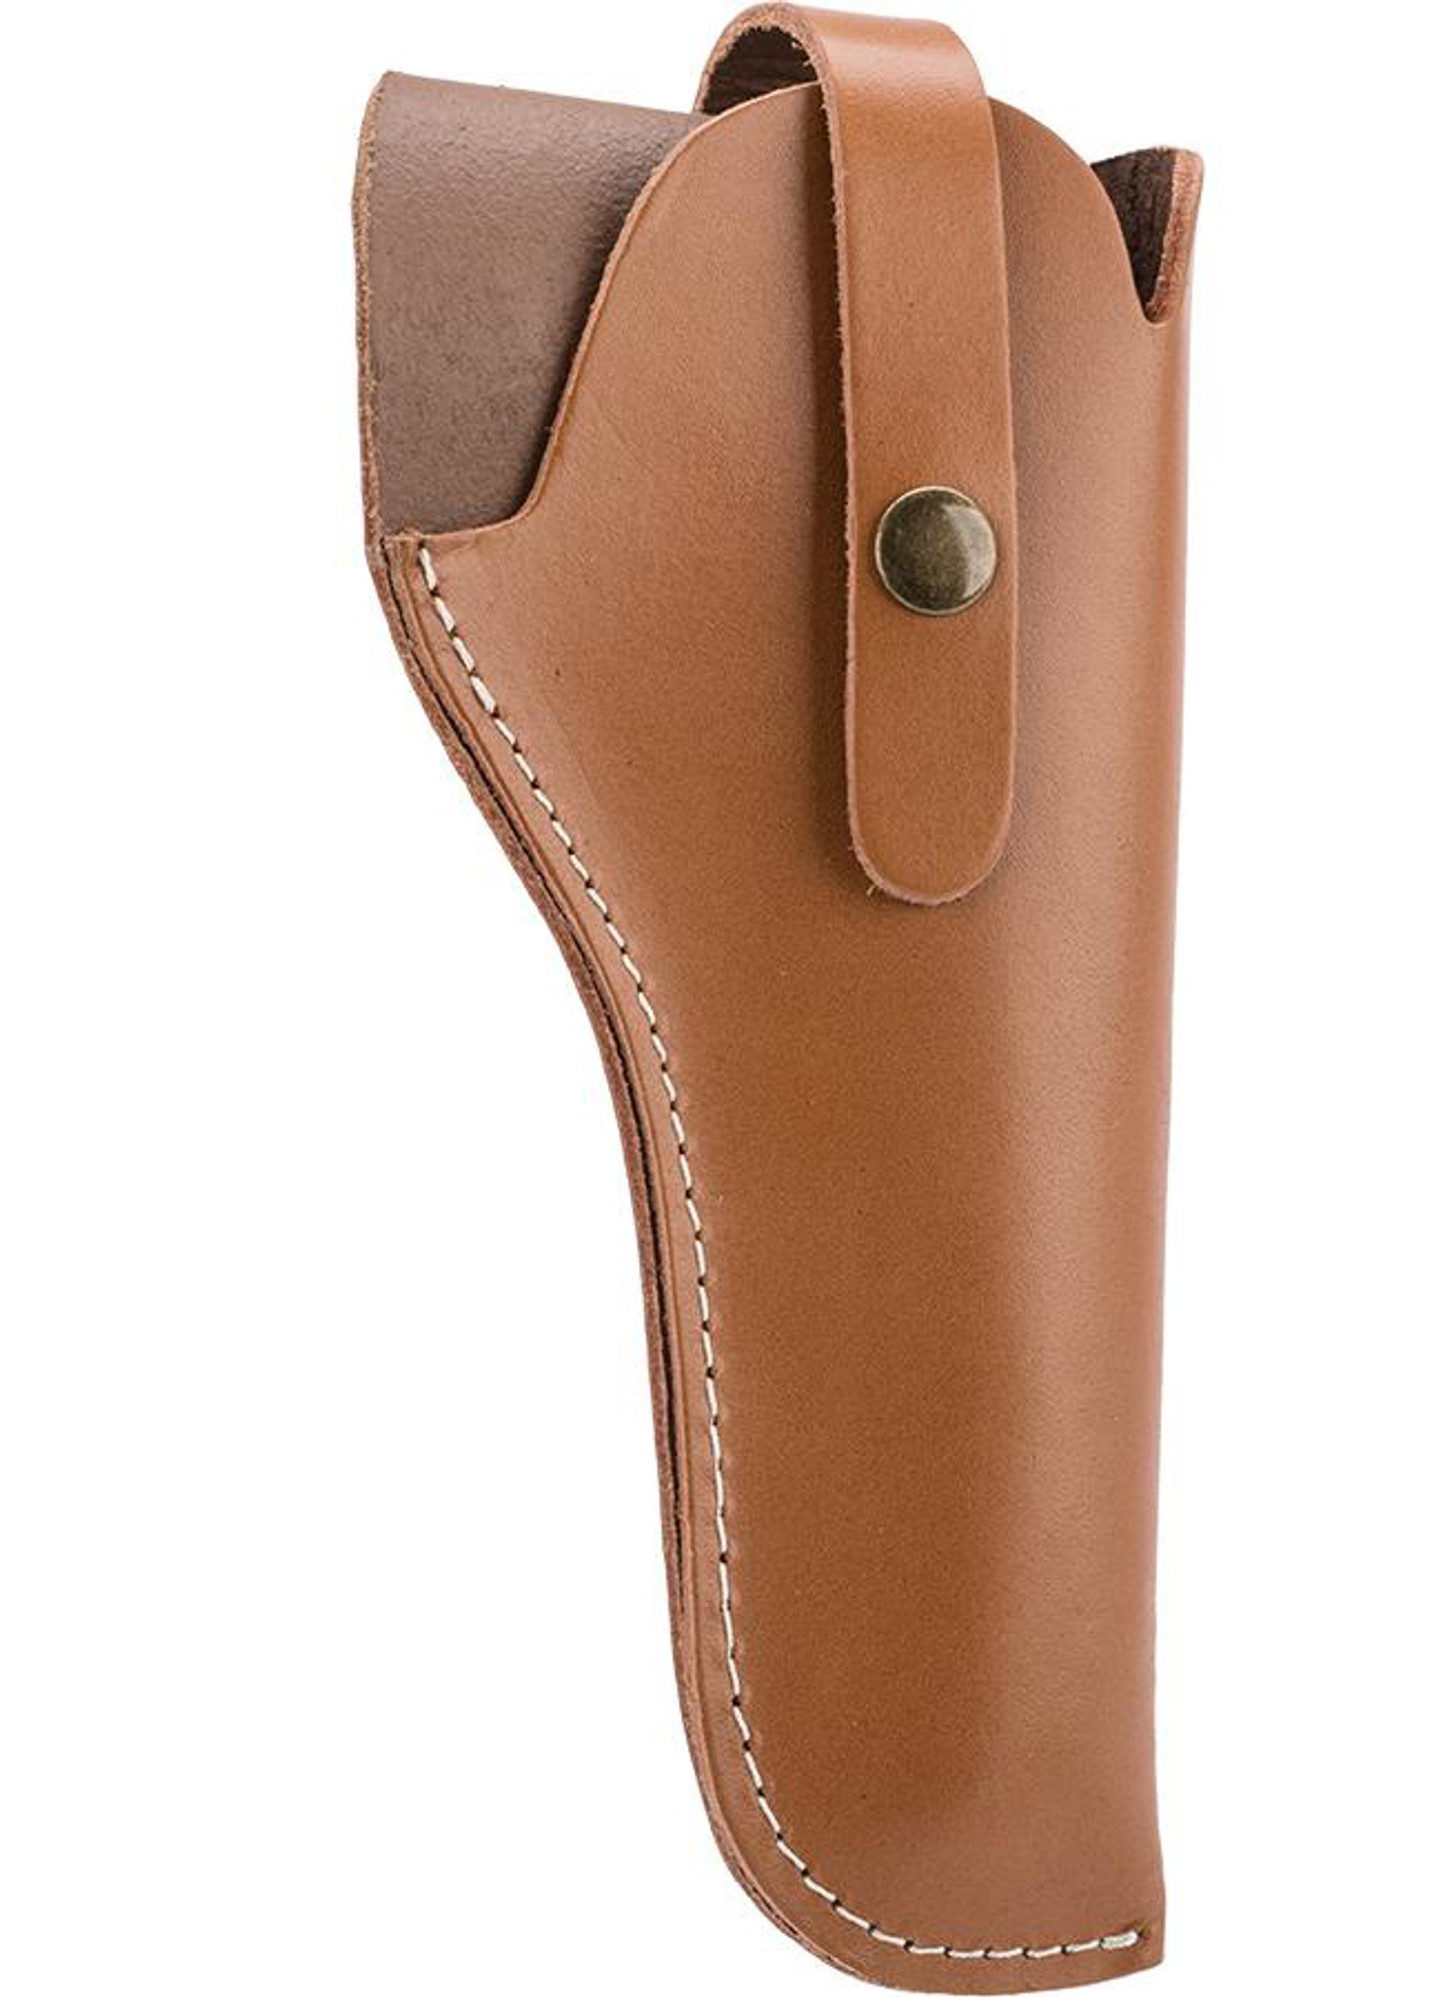 Allen Company Red Mesa Leather Holster (Size: 01)